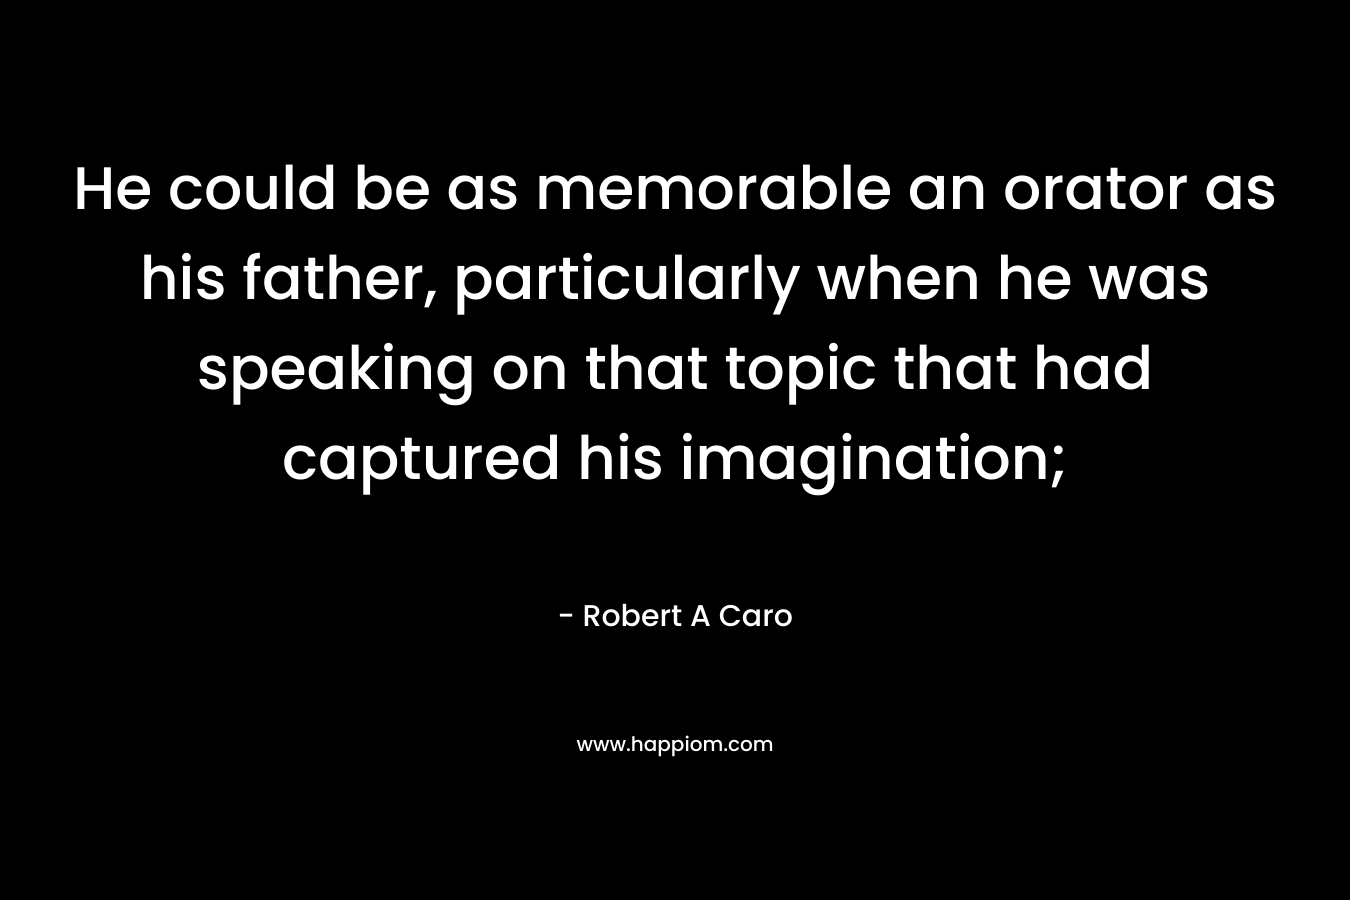 He could be as memorable an orator as his father, particularly when he was speaking on that topic that had captured his imagination; – Robert A Caro